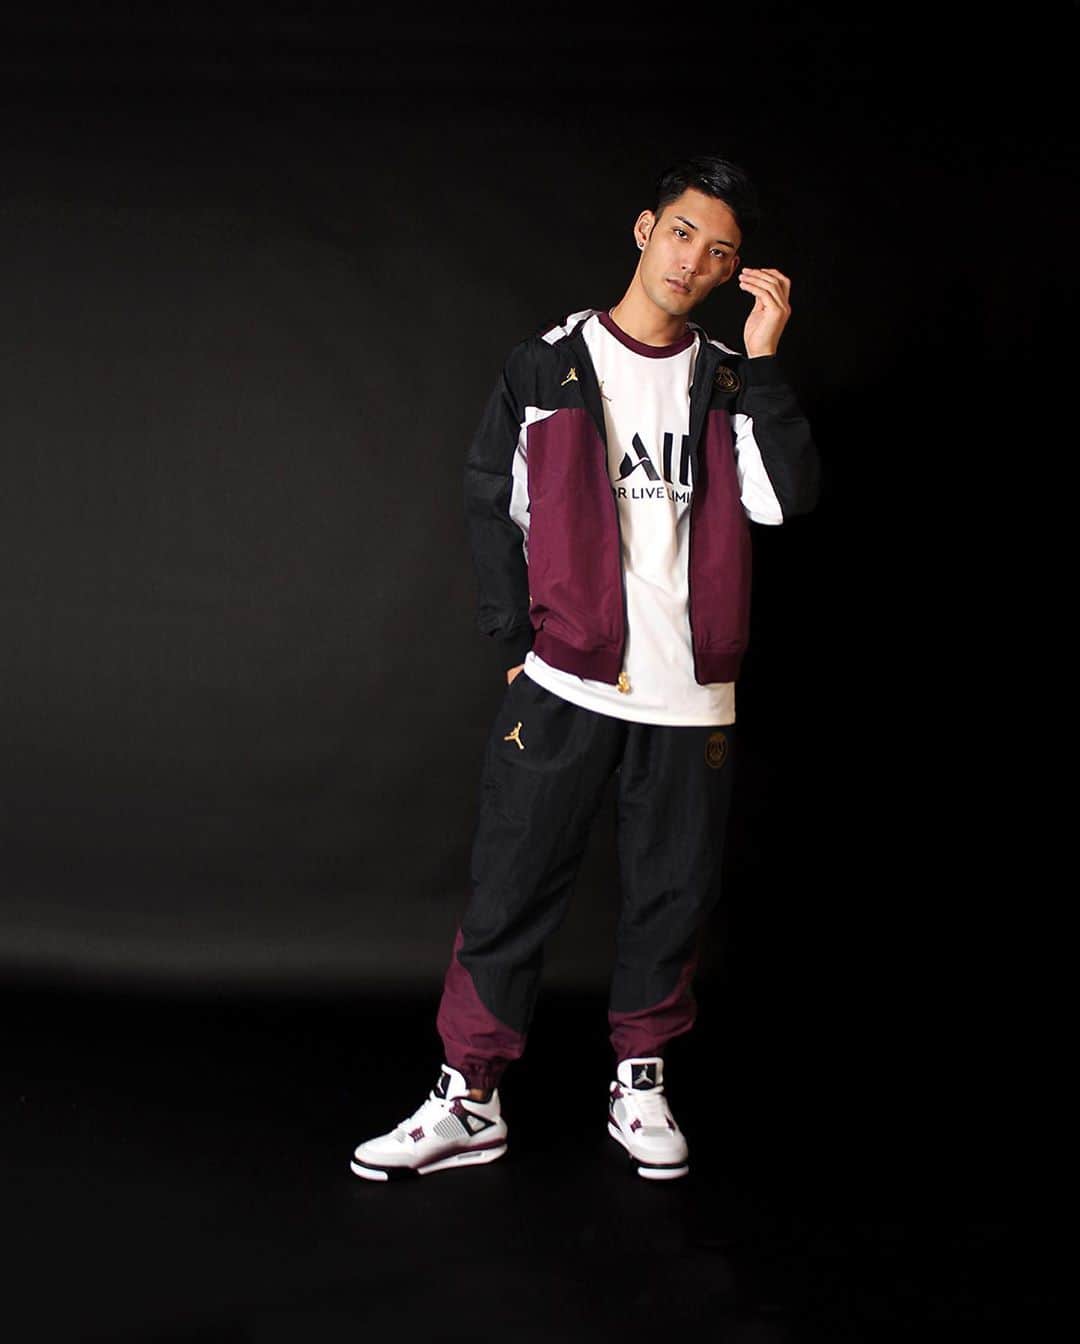 A+Sさんのインスタグラム写真 - (A+SInstagram)「2020 .10 .11 (sun) in store  ■NIKE JORDAN PSG FULLZIP JACKET COLOR : BLACK×BORDEAUX SIZE : S - 2XL PRICE : ¥17,500 (+TAX)  パリ・サンジェルマンのアンセムジャケットで日常にサッカースタイルを取り入れよう。試合前のアンセムでプロがピッチで着用するものをモデルにしており、軽量の織り生地で作られています。ジャケットは、ジョーダンブランドとのクラブのコラボレーションを象徴する、刺繍とステッチダウンのディテールの配列を備えています。  PARIS X JORDAN UNITED. Soccer style hits the street in the Paris Saint-Germain Anthem Jacket. Modeled after what the pros wear on the pitch during pre-game anthems, it's made with lightweight woven fabric. The jacket features an array of embroidered and stitched-down details to showcase the club's collaboration with Jordan brand.  ■NIKE JORDAN PSG ANTHEM PANT COLOR : BLACK×BORDEAUX SIZE : S - 2XL PRICE : ¥14,000 (+TAX)  サッカーをイメージしたストリートウェア。パリ サンジェルマン アンセム パンツは、試合前にピッチで着用するスタイルをイメージ。ハリがあって軽量のメタリックナイロンにメッシュとタフタの裏地を施し、脚部分にはジッパーをあしらいました。  Inspired by what players wear onto the pitch before the match, the Paris SaintGermain Anthem Pants are made from crisp, light metallic fabric. They use a mesh and taffeta lining and zippered leg openings. Colors and graphics highlight the collaboration with the French soccer club.  #a_and_s #NIKE #PSG #JORDAN #JUMPMAN #JUMPMAN23 #NIKEJORDAN #JORDANBRAND #JORDANBRANDPSG #CICESTPARIS #PANAME」10月7日 11時48分 - a_and_s_official